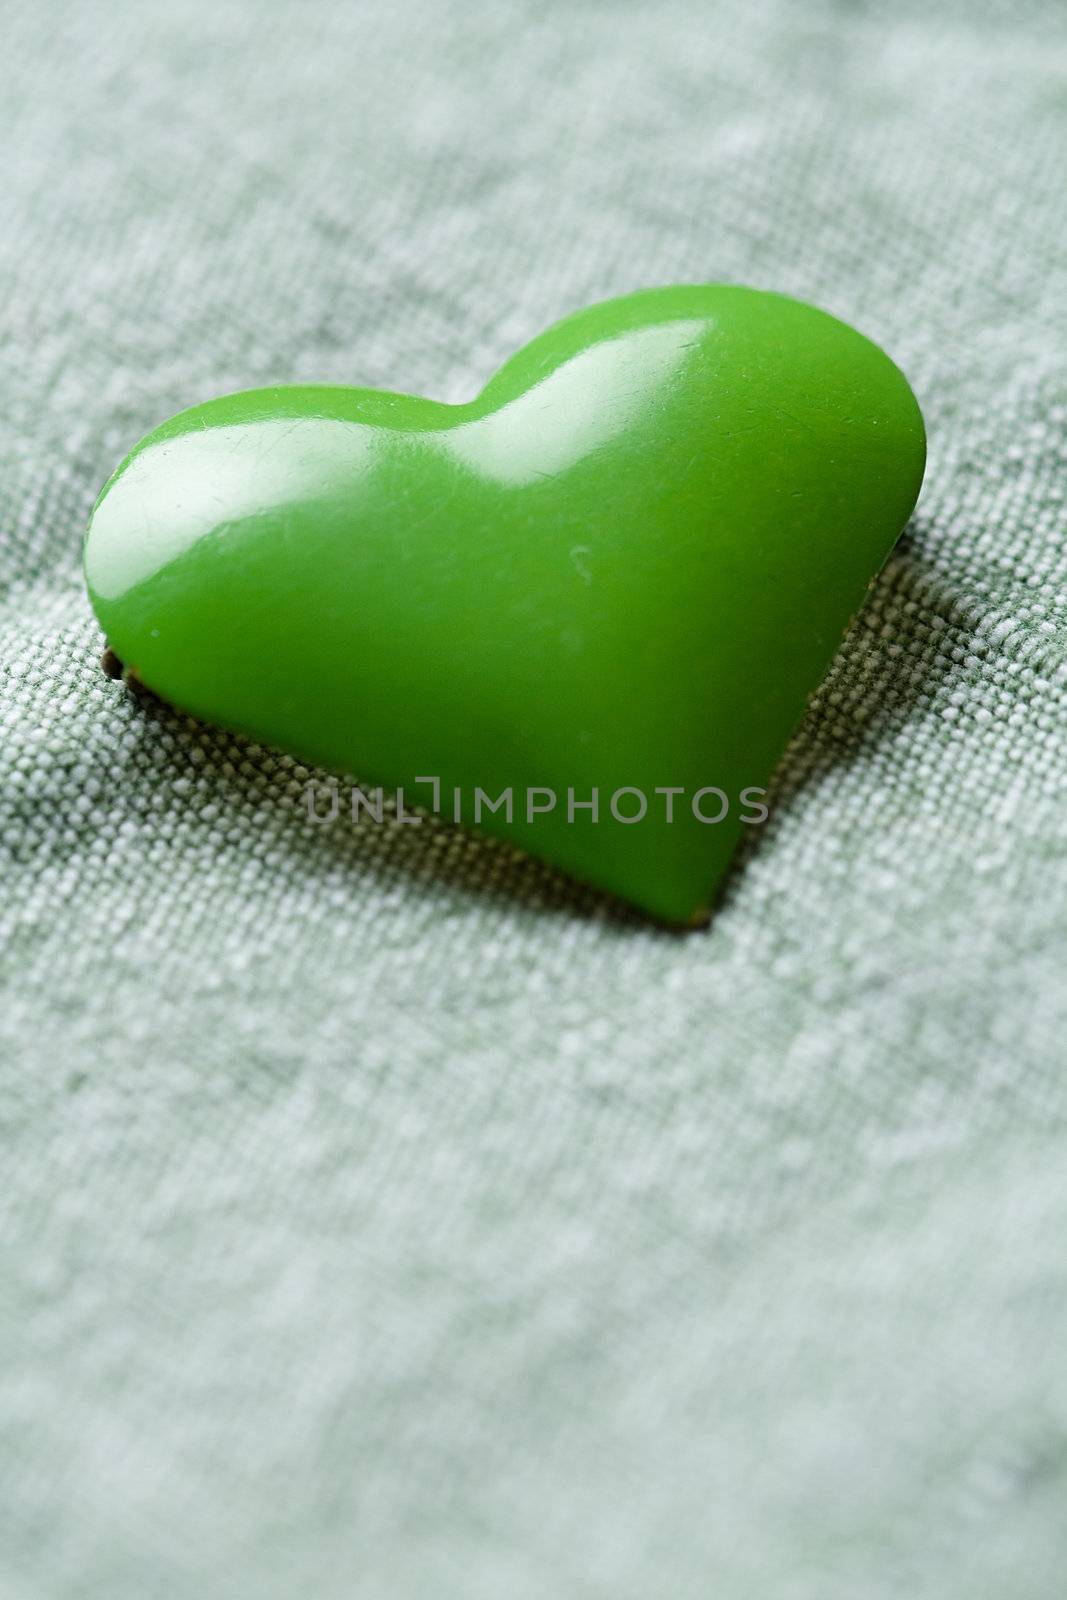 The green iron heart on the cloth background